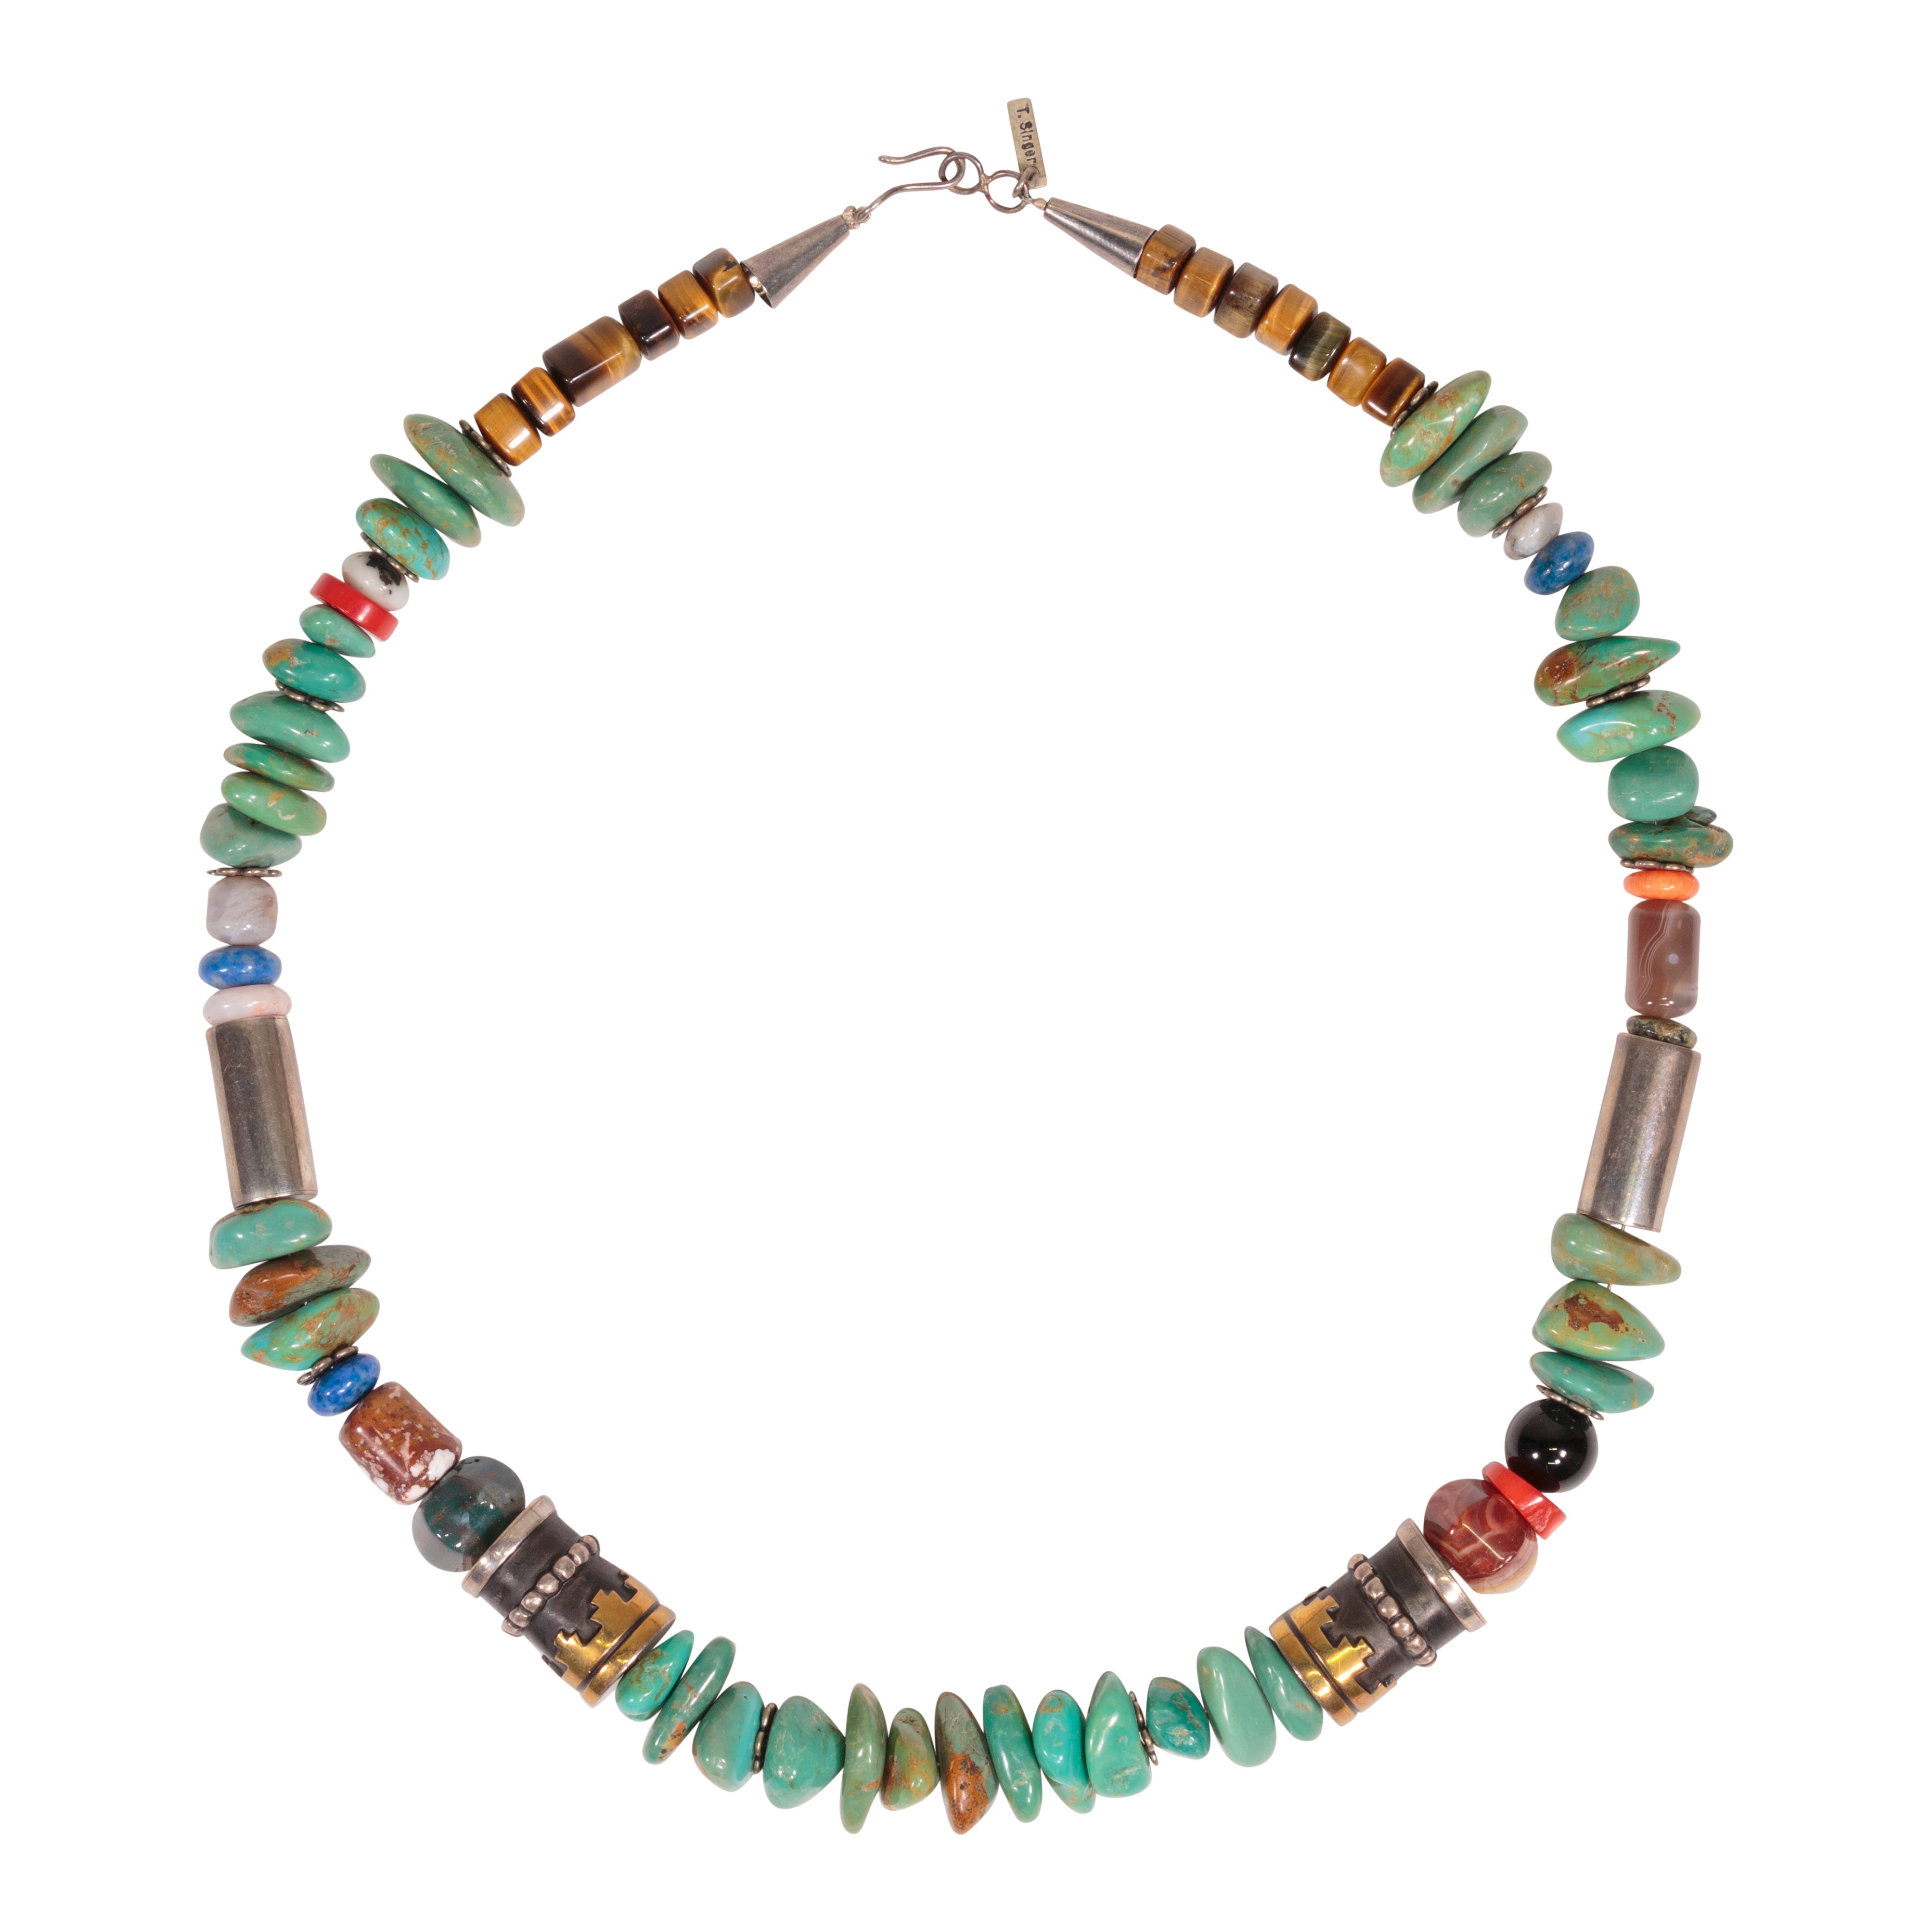 Navajo Multi-Stone Necklace by Tommy Singer, Jewelry, Necklace, Native